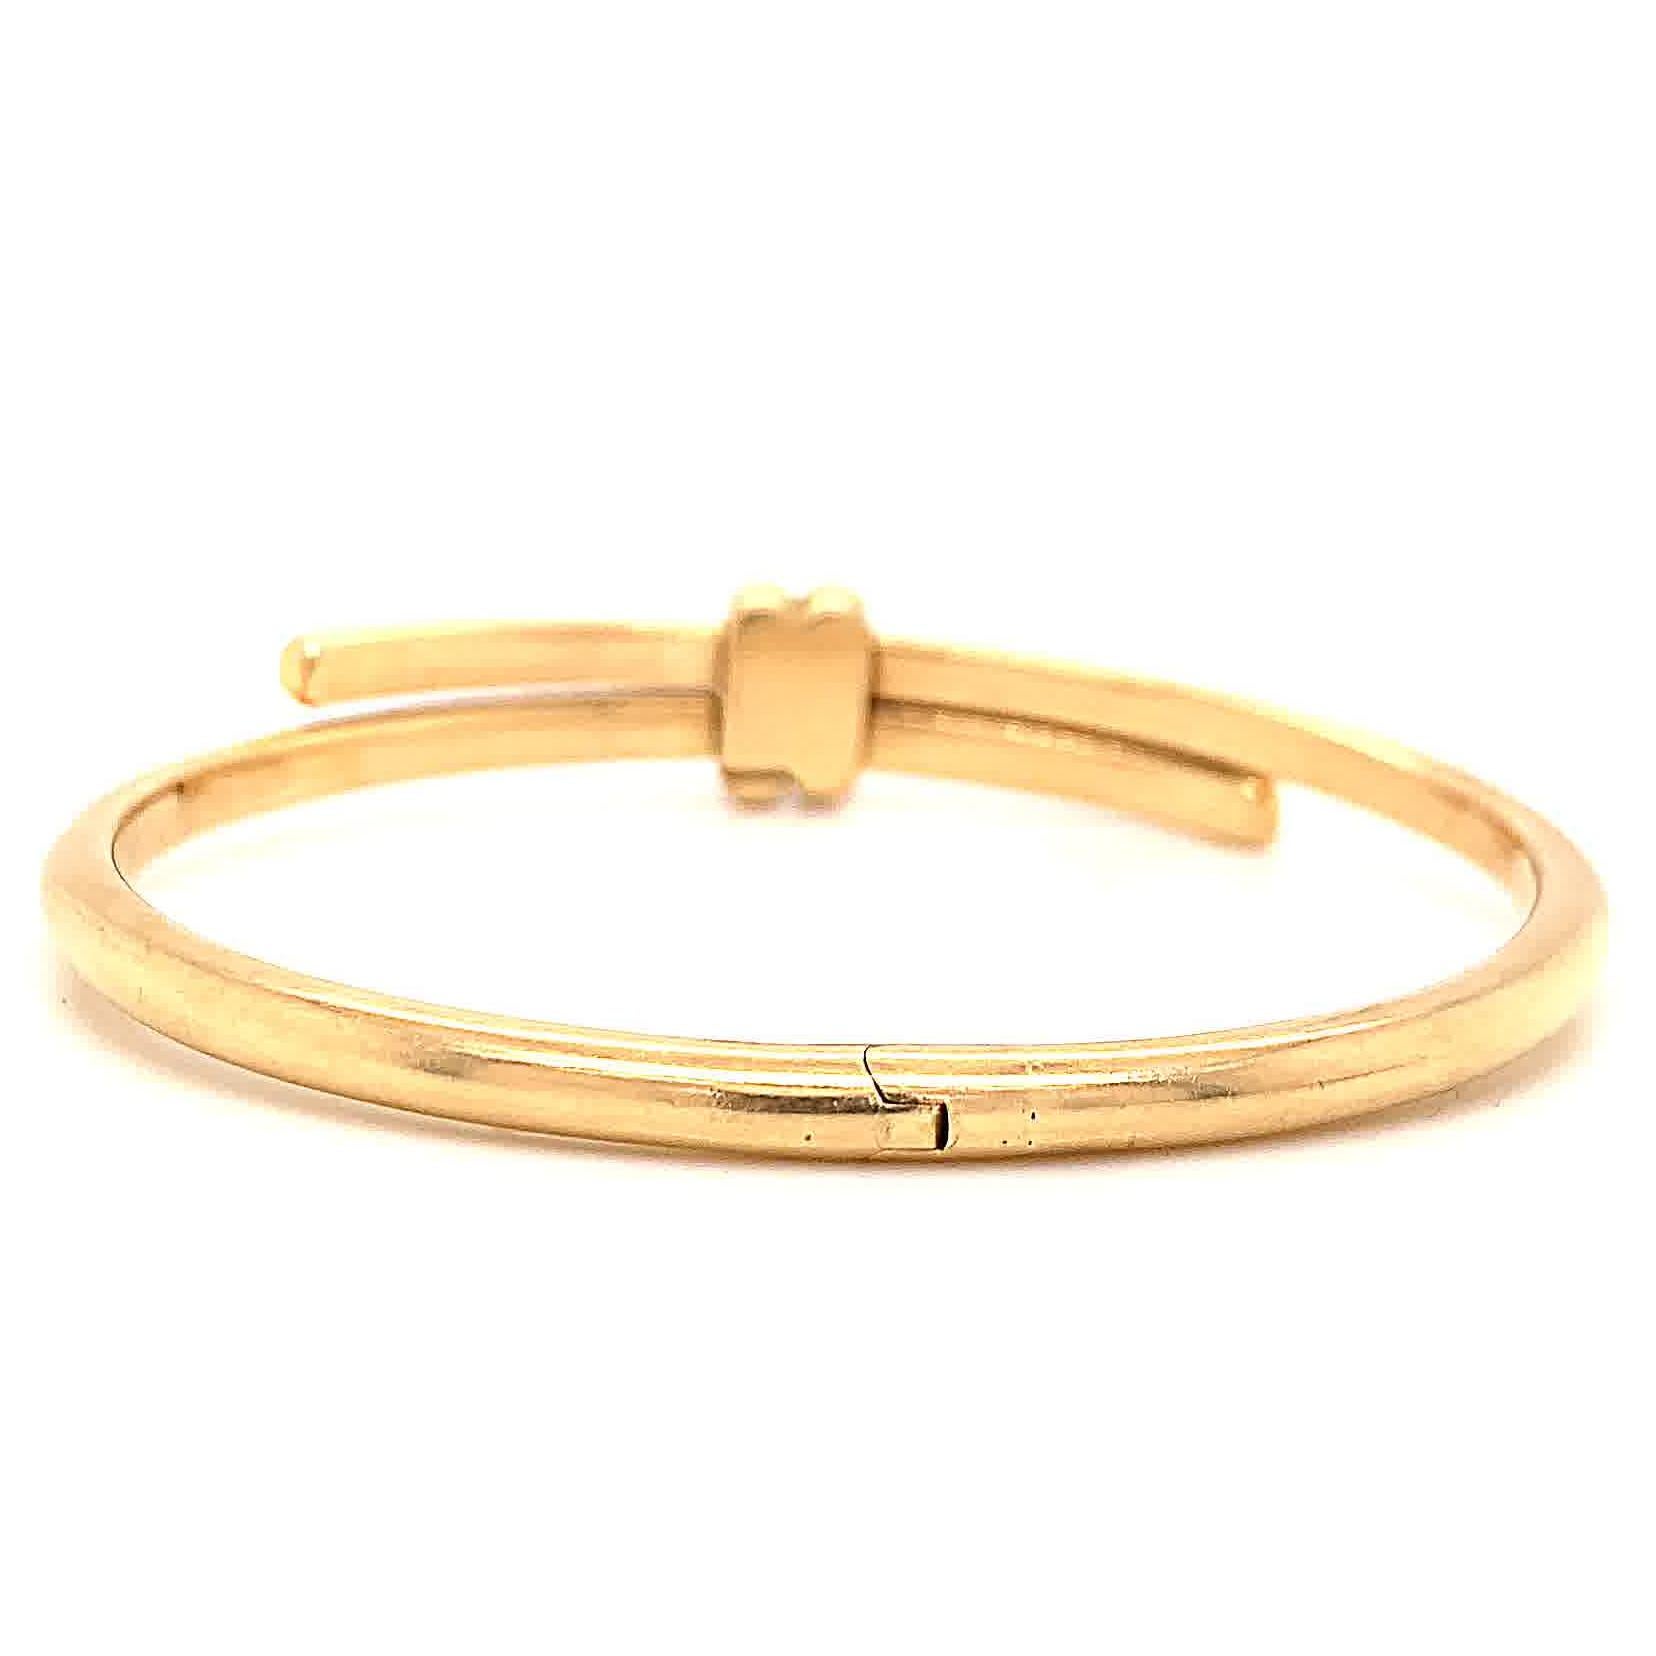 Women's or Men's Vintage French Chaumet 18K Gold Bangle